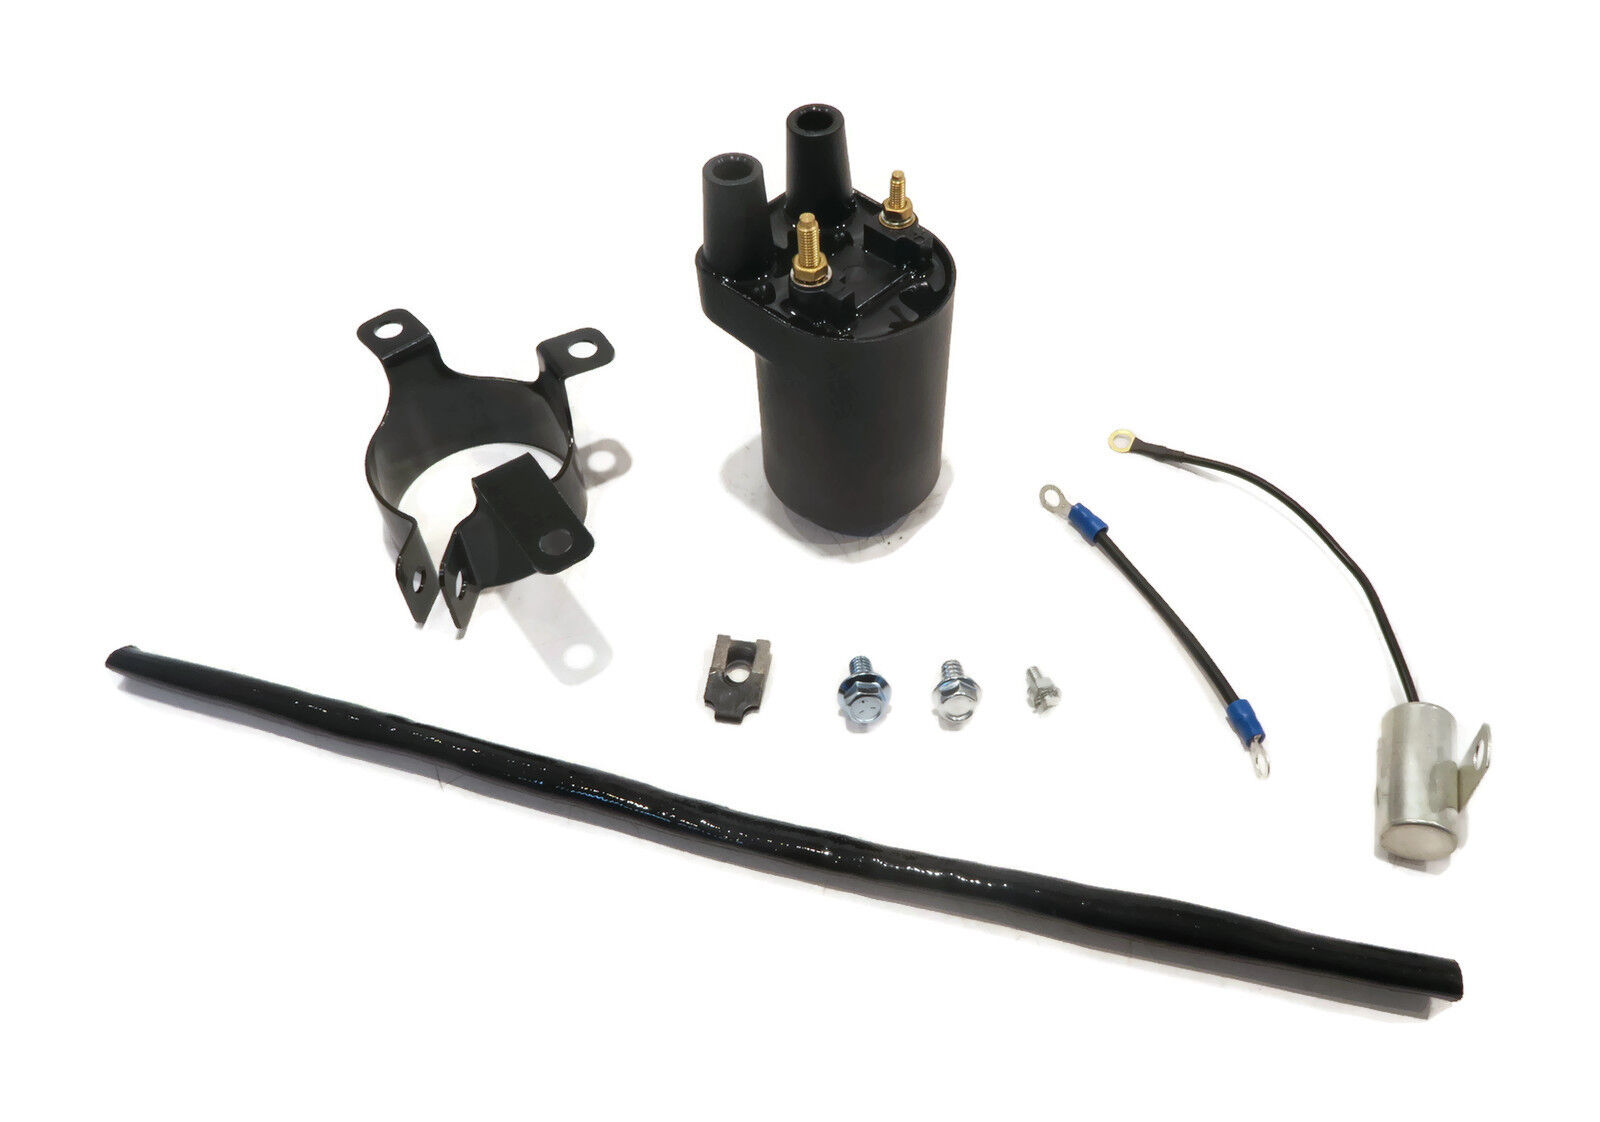 New IGNITION COIL KIT fits Toro Wheel Horse 520-H Garden Tractor